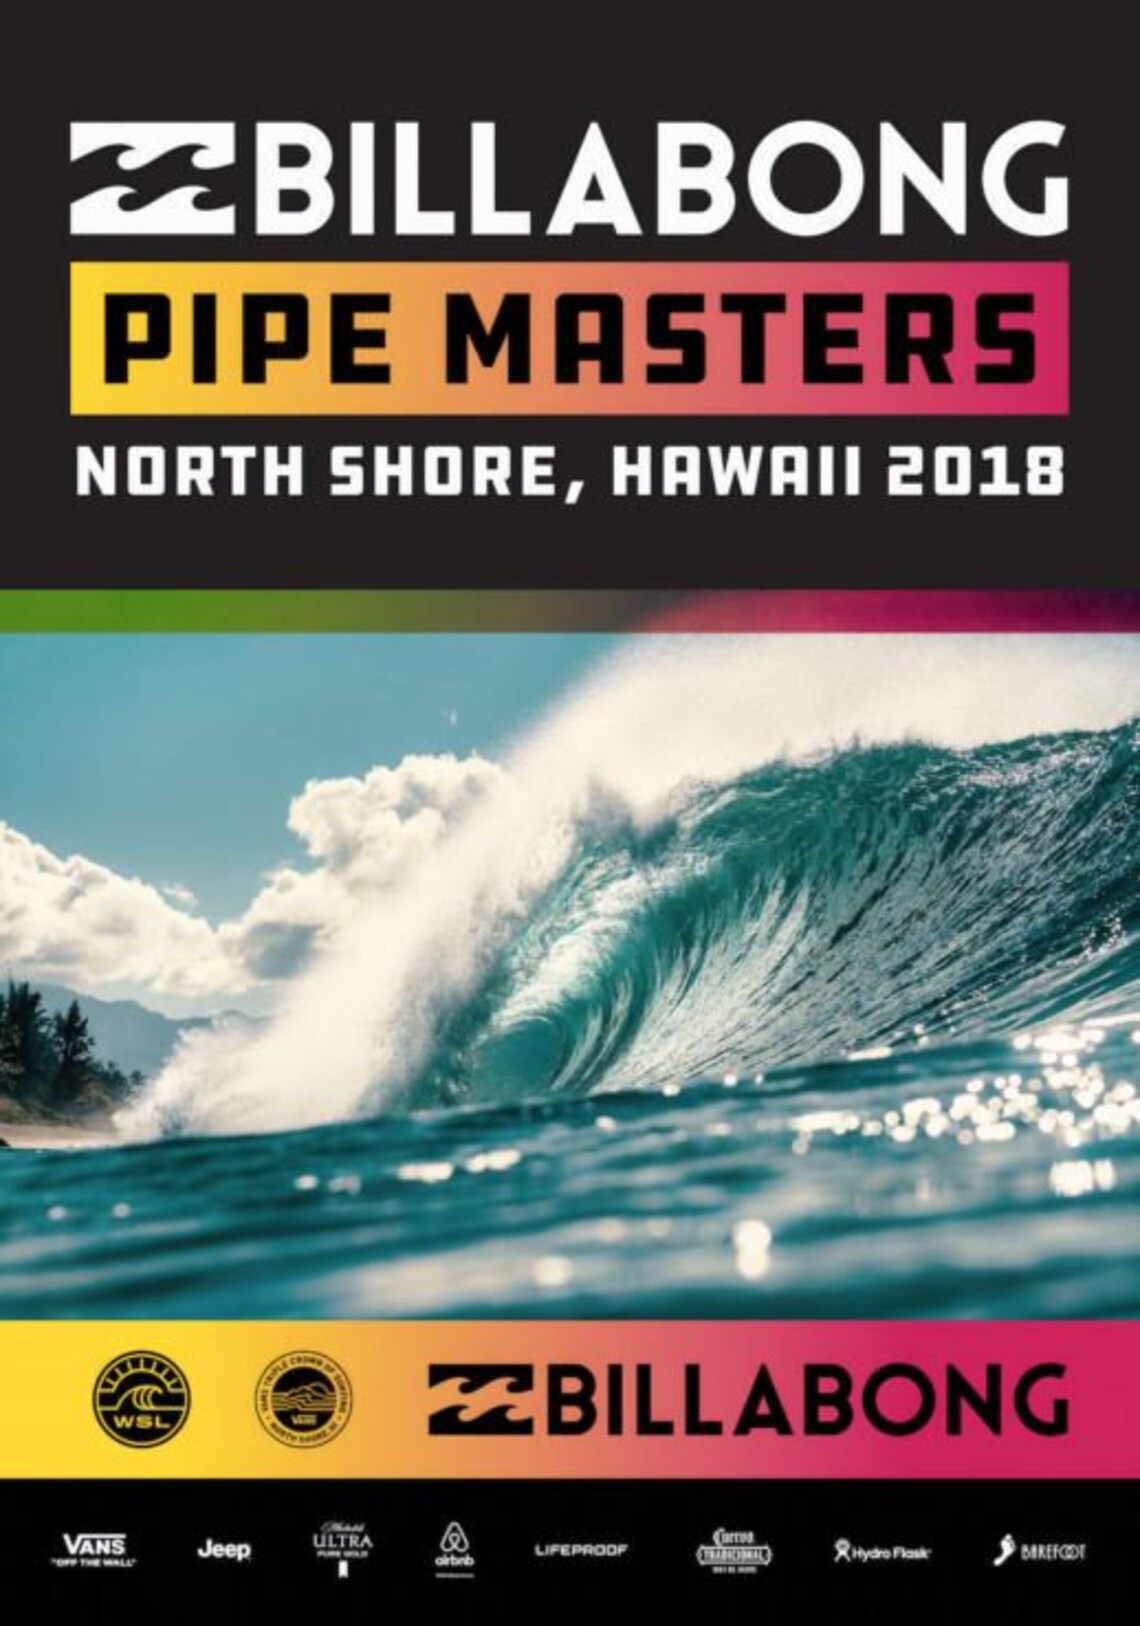 2018 BILLABONG PIPE MASTERS Surf Print Surfing Poster | Etsy